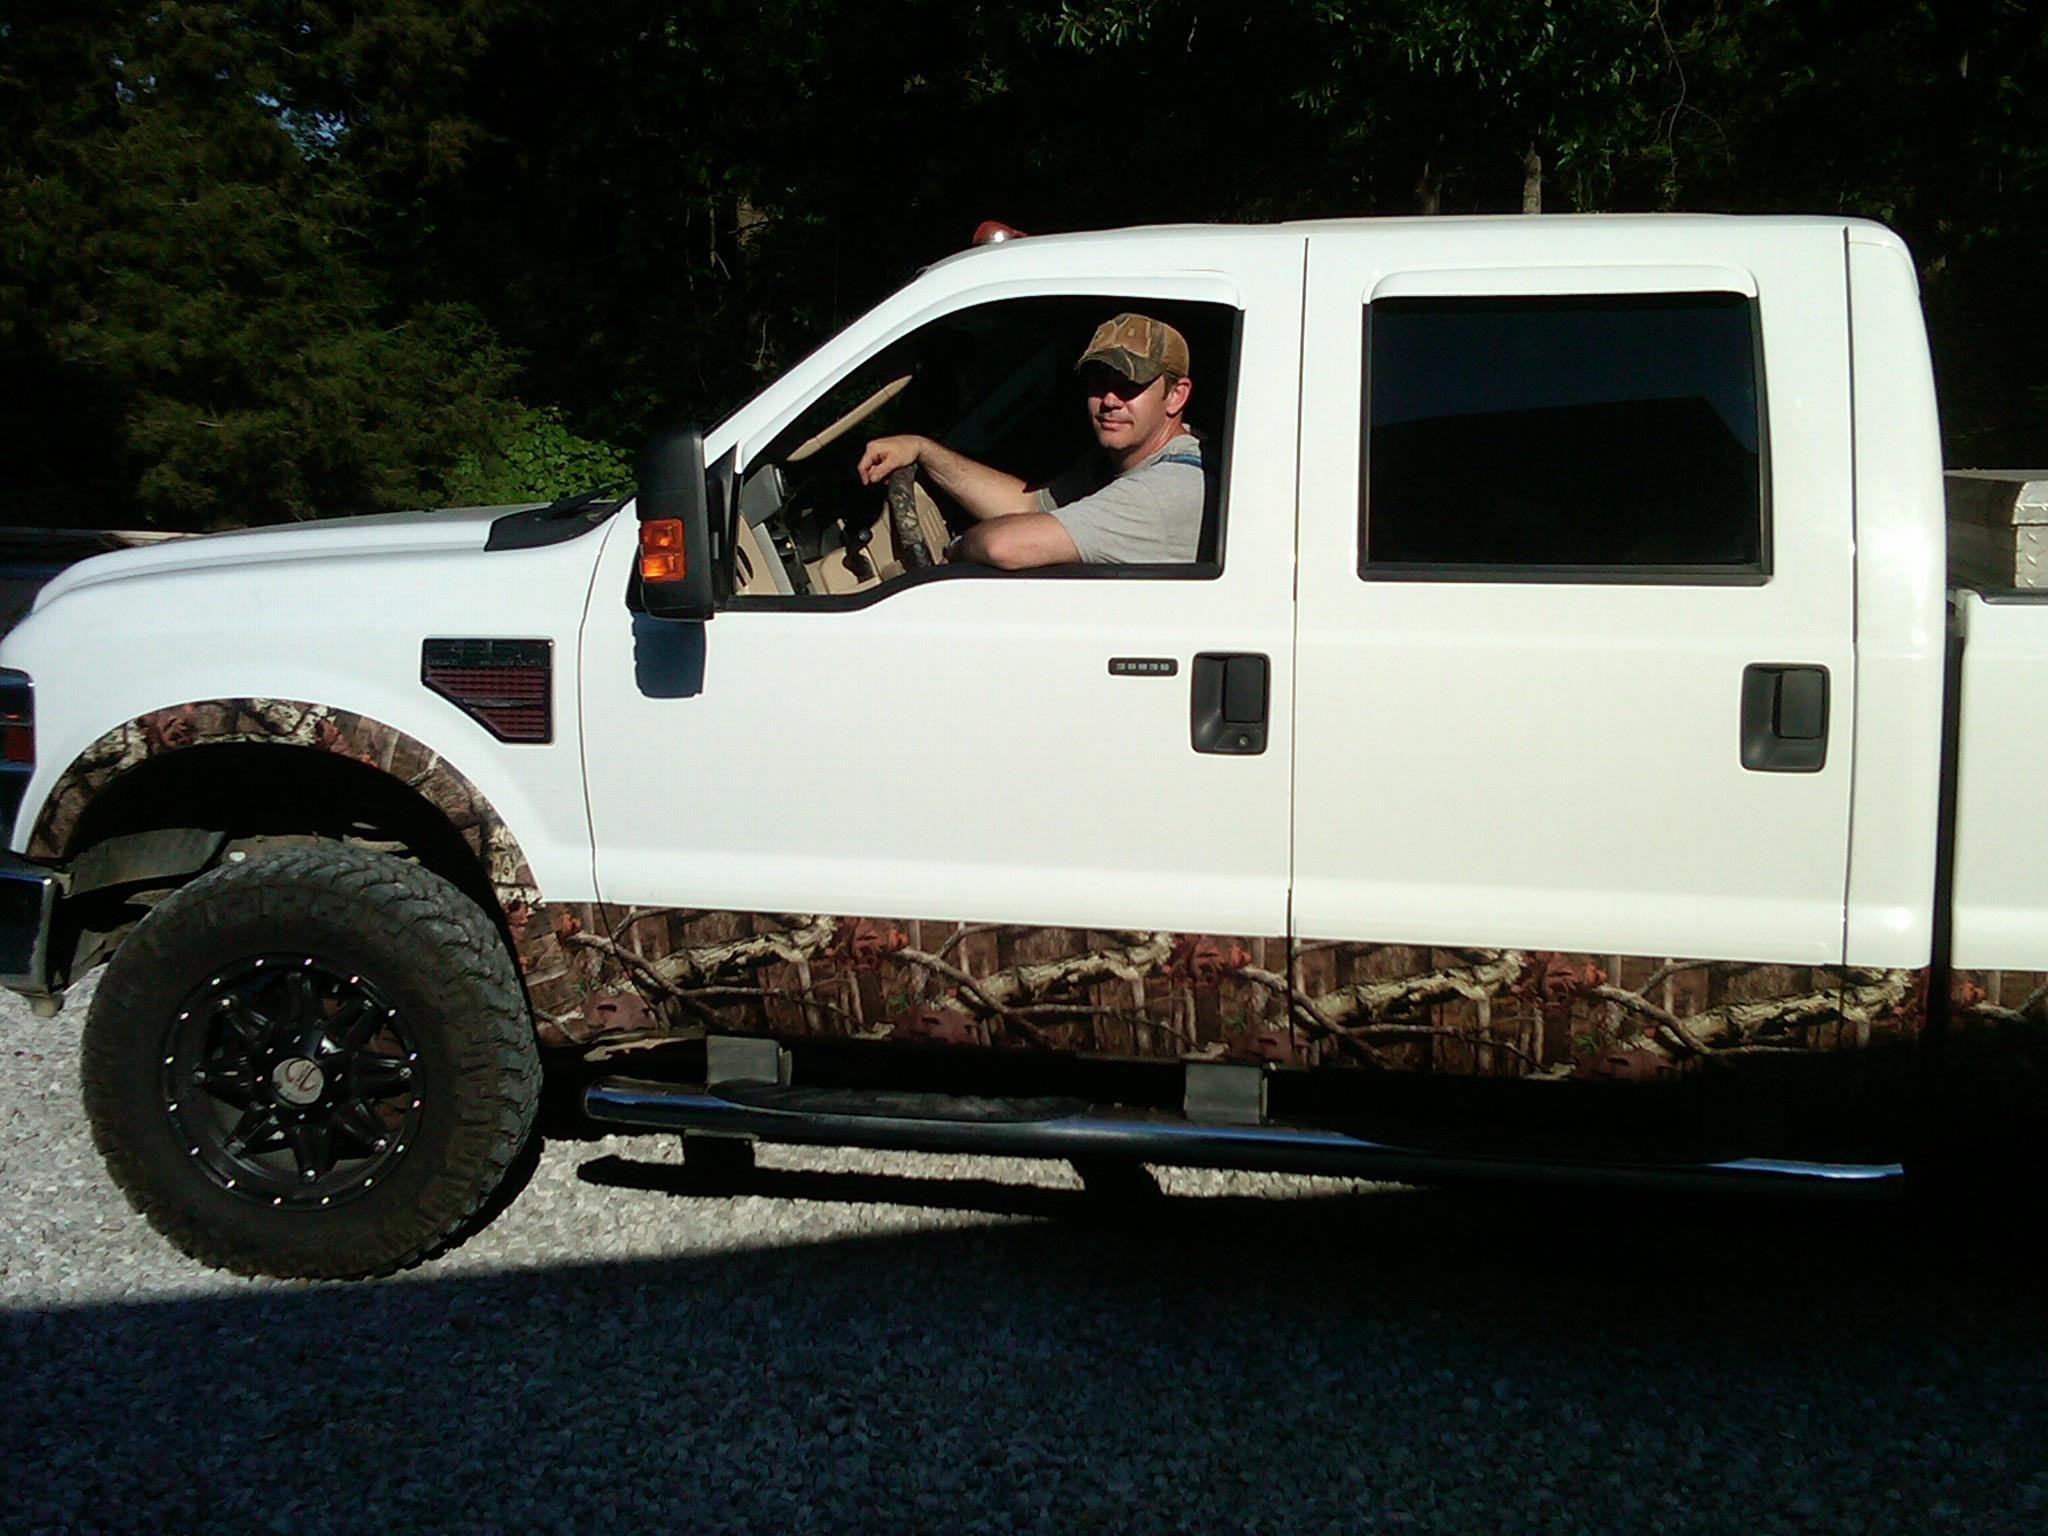 2048x1536 Get your Camo Truck Wrap Kits at www.CamoMyRide.com. Over 60 camo patterns  to choose from! | Camouflage Vinyl Truck Kits | Pinterest | Camo truck,  Chevy ...